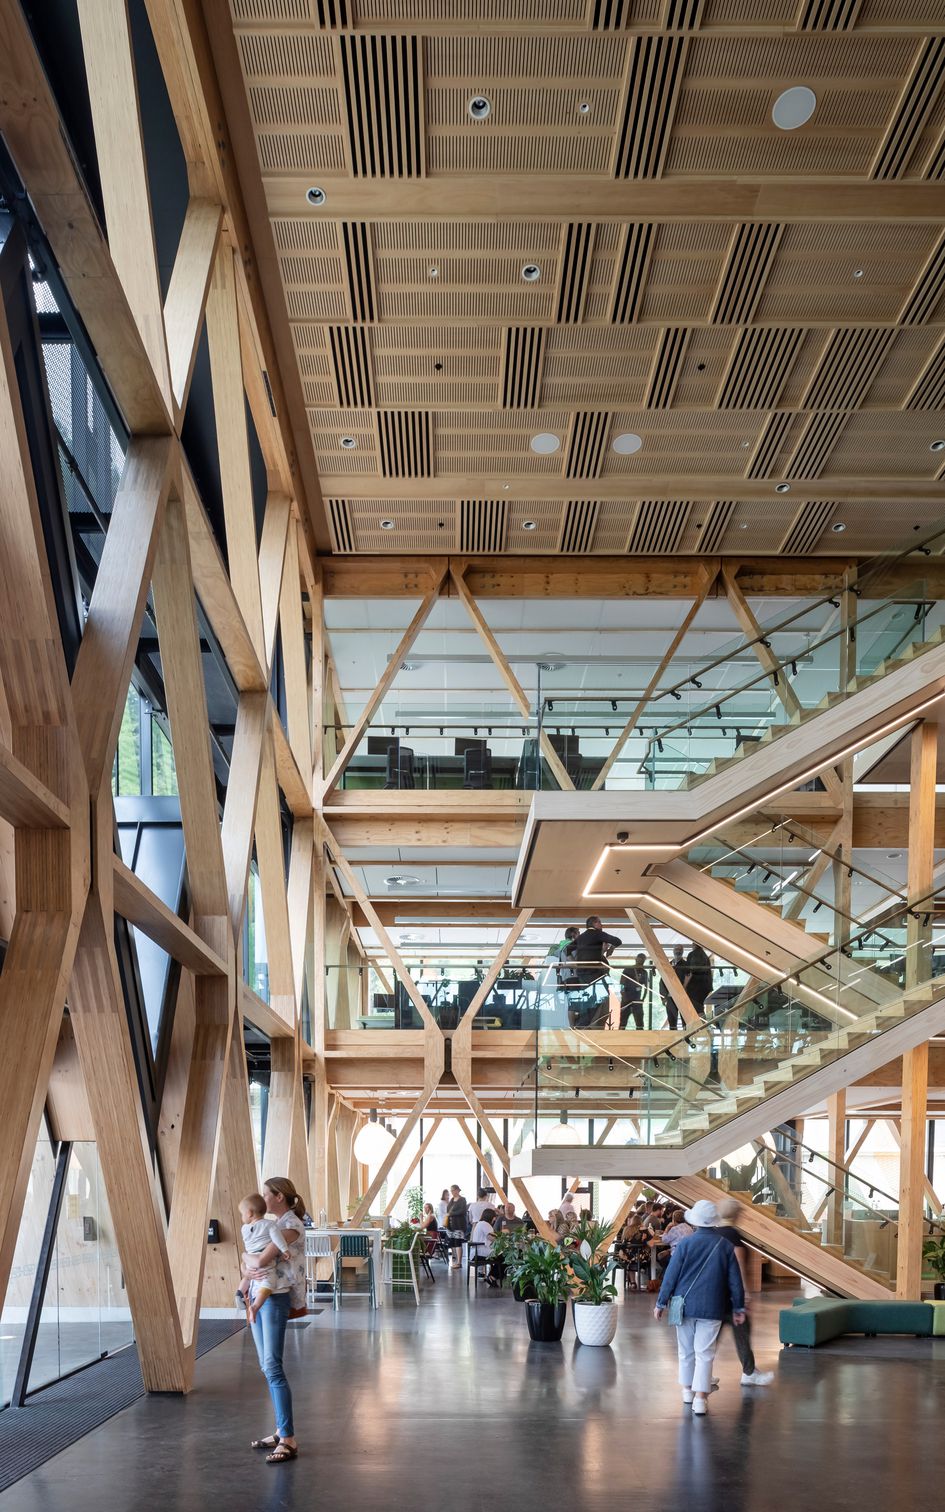 Photographer: Patrick Reynolds Scion Innovation Hub, designed in collaboration with Irving Smith Architects, incorporates highly sustainable construction and design principles to achieve a carbon zero outcome